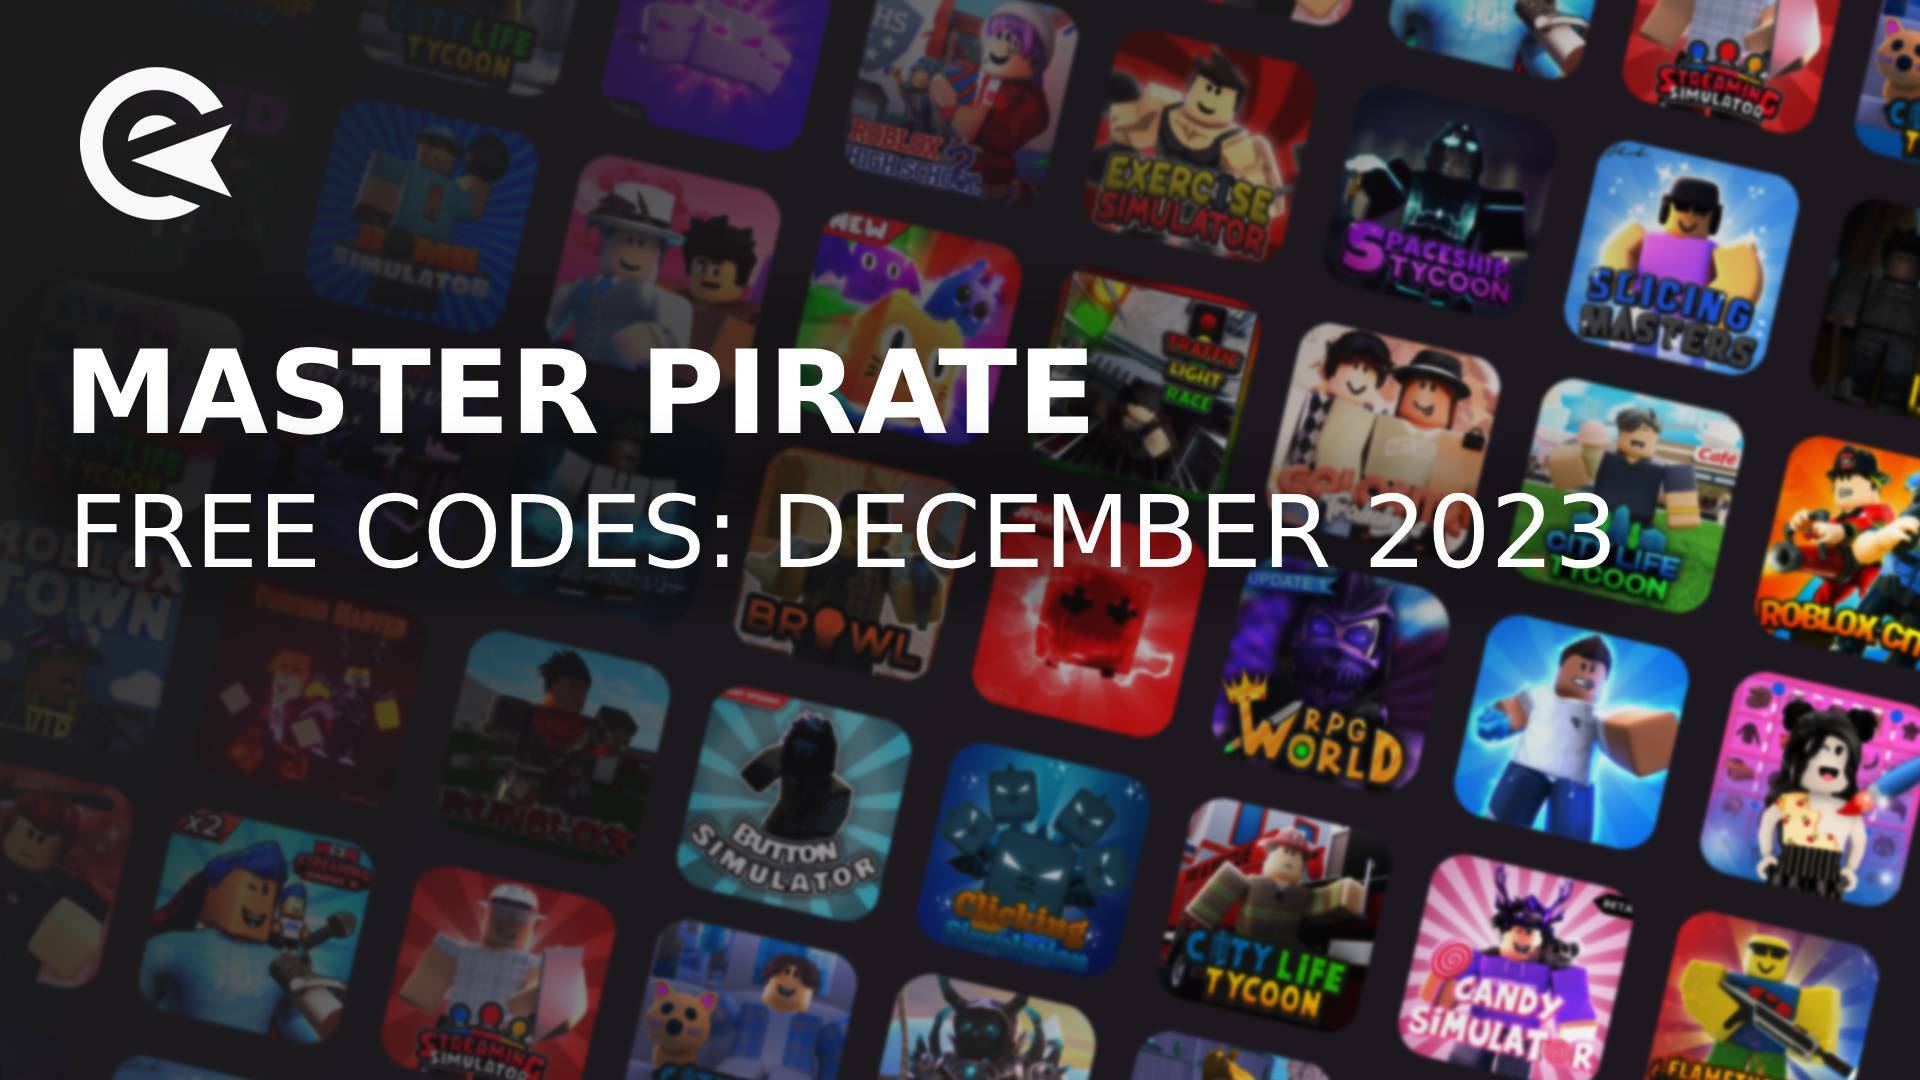 Master Pirate codes – XP, stat resets, money, and more